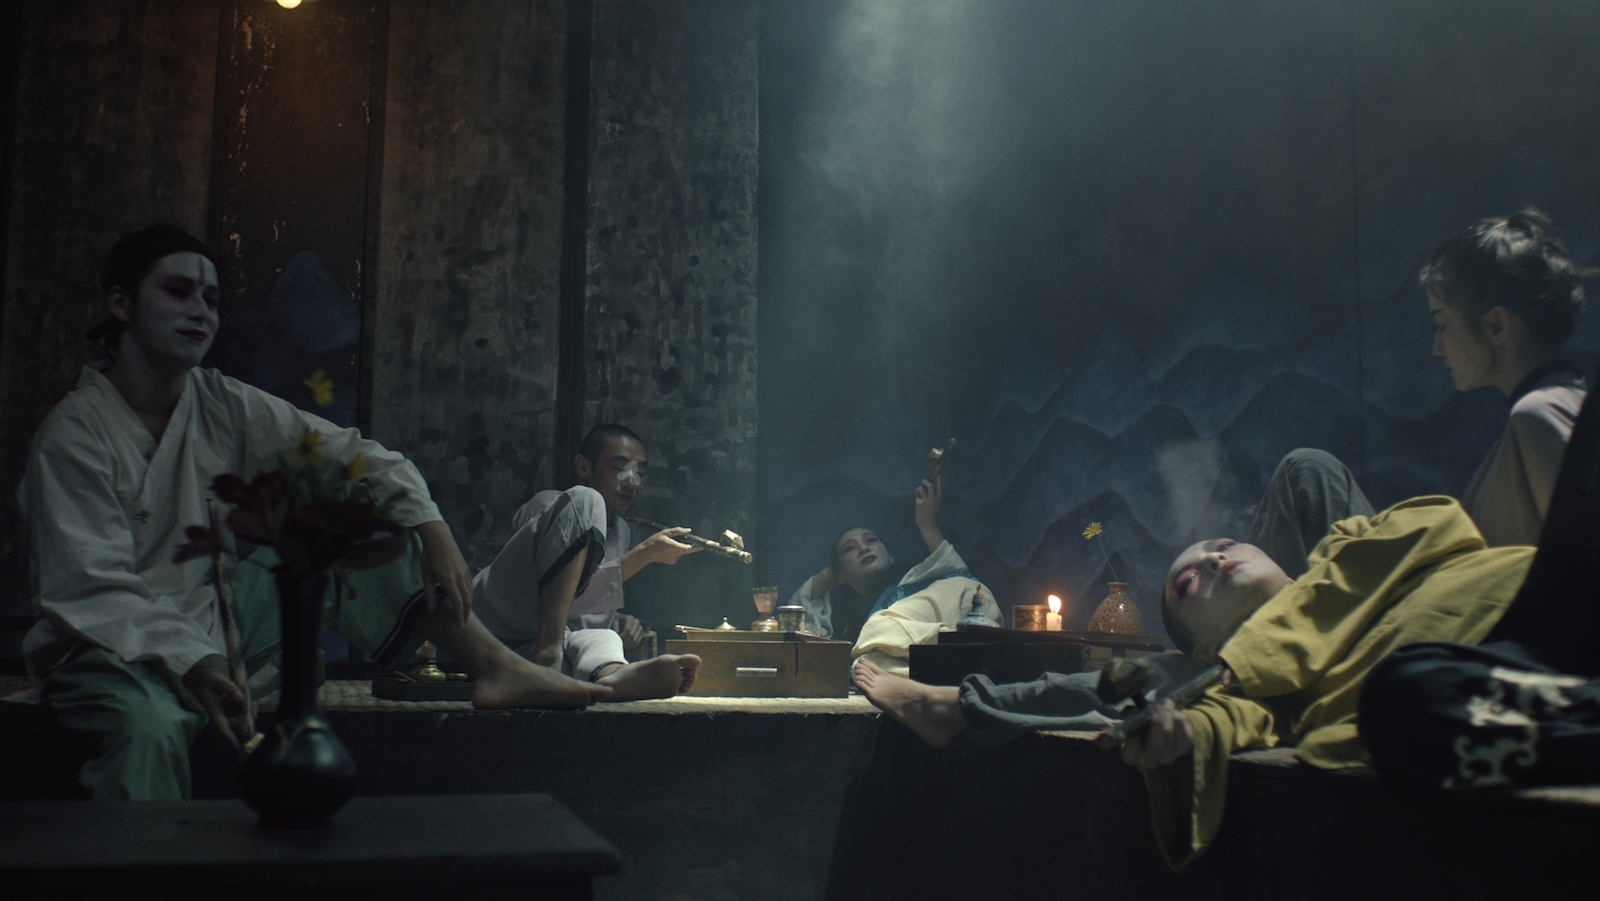 A troupe of actors sprawled around a shadowy den, smoking.